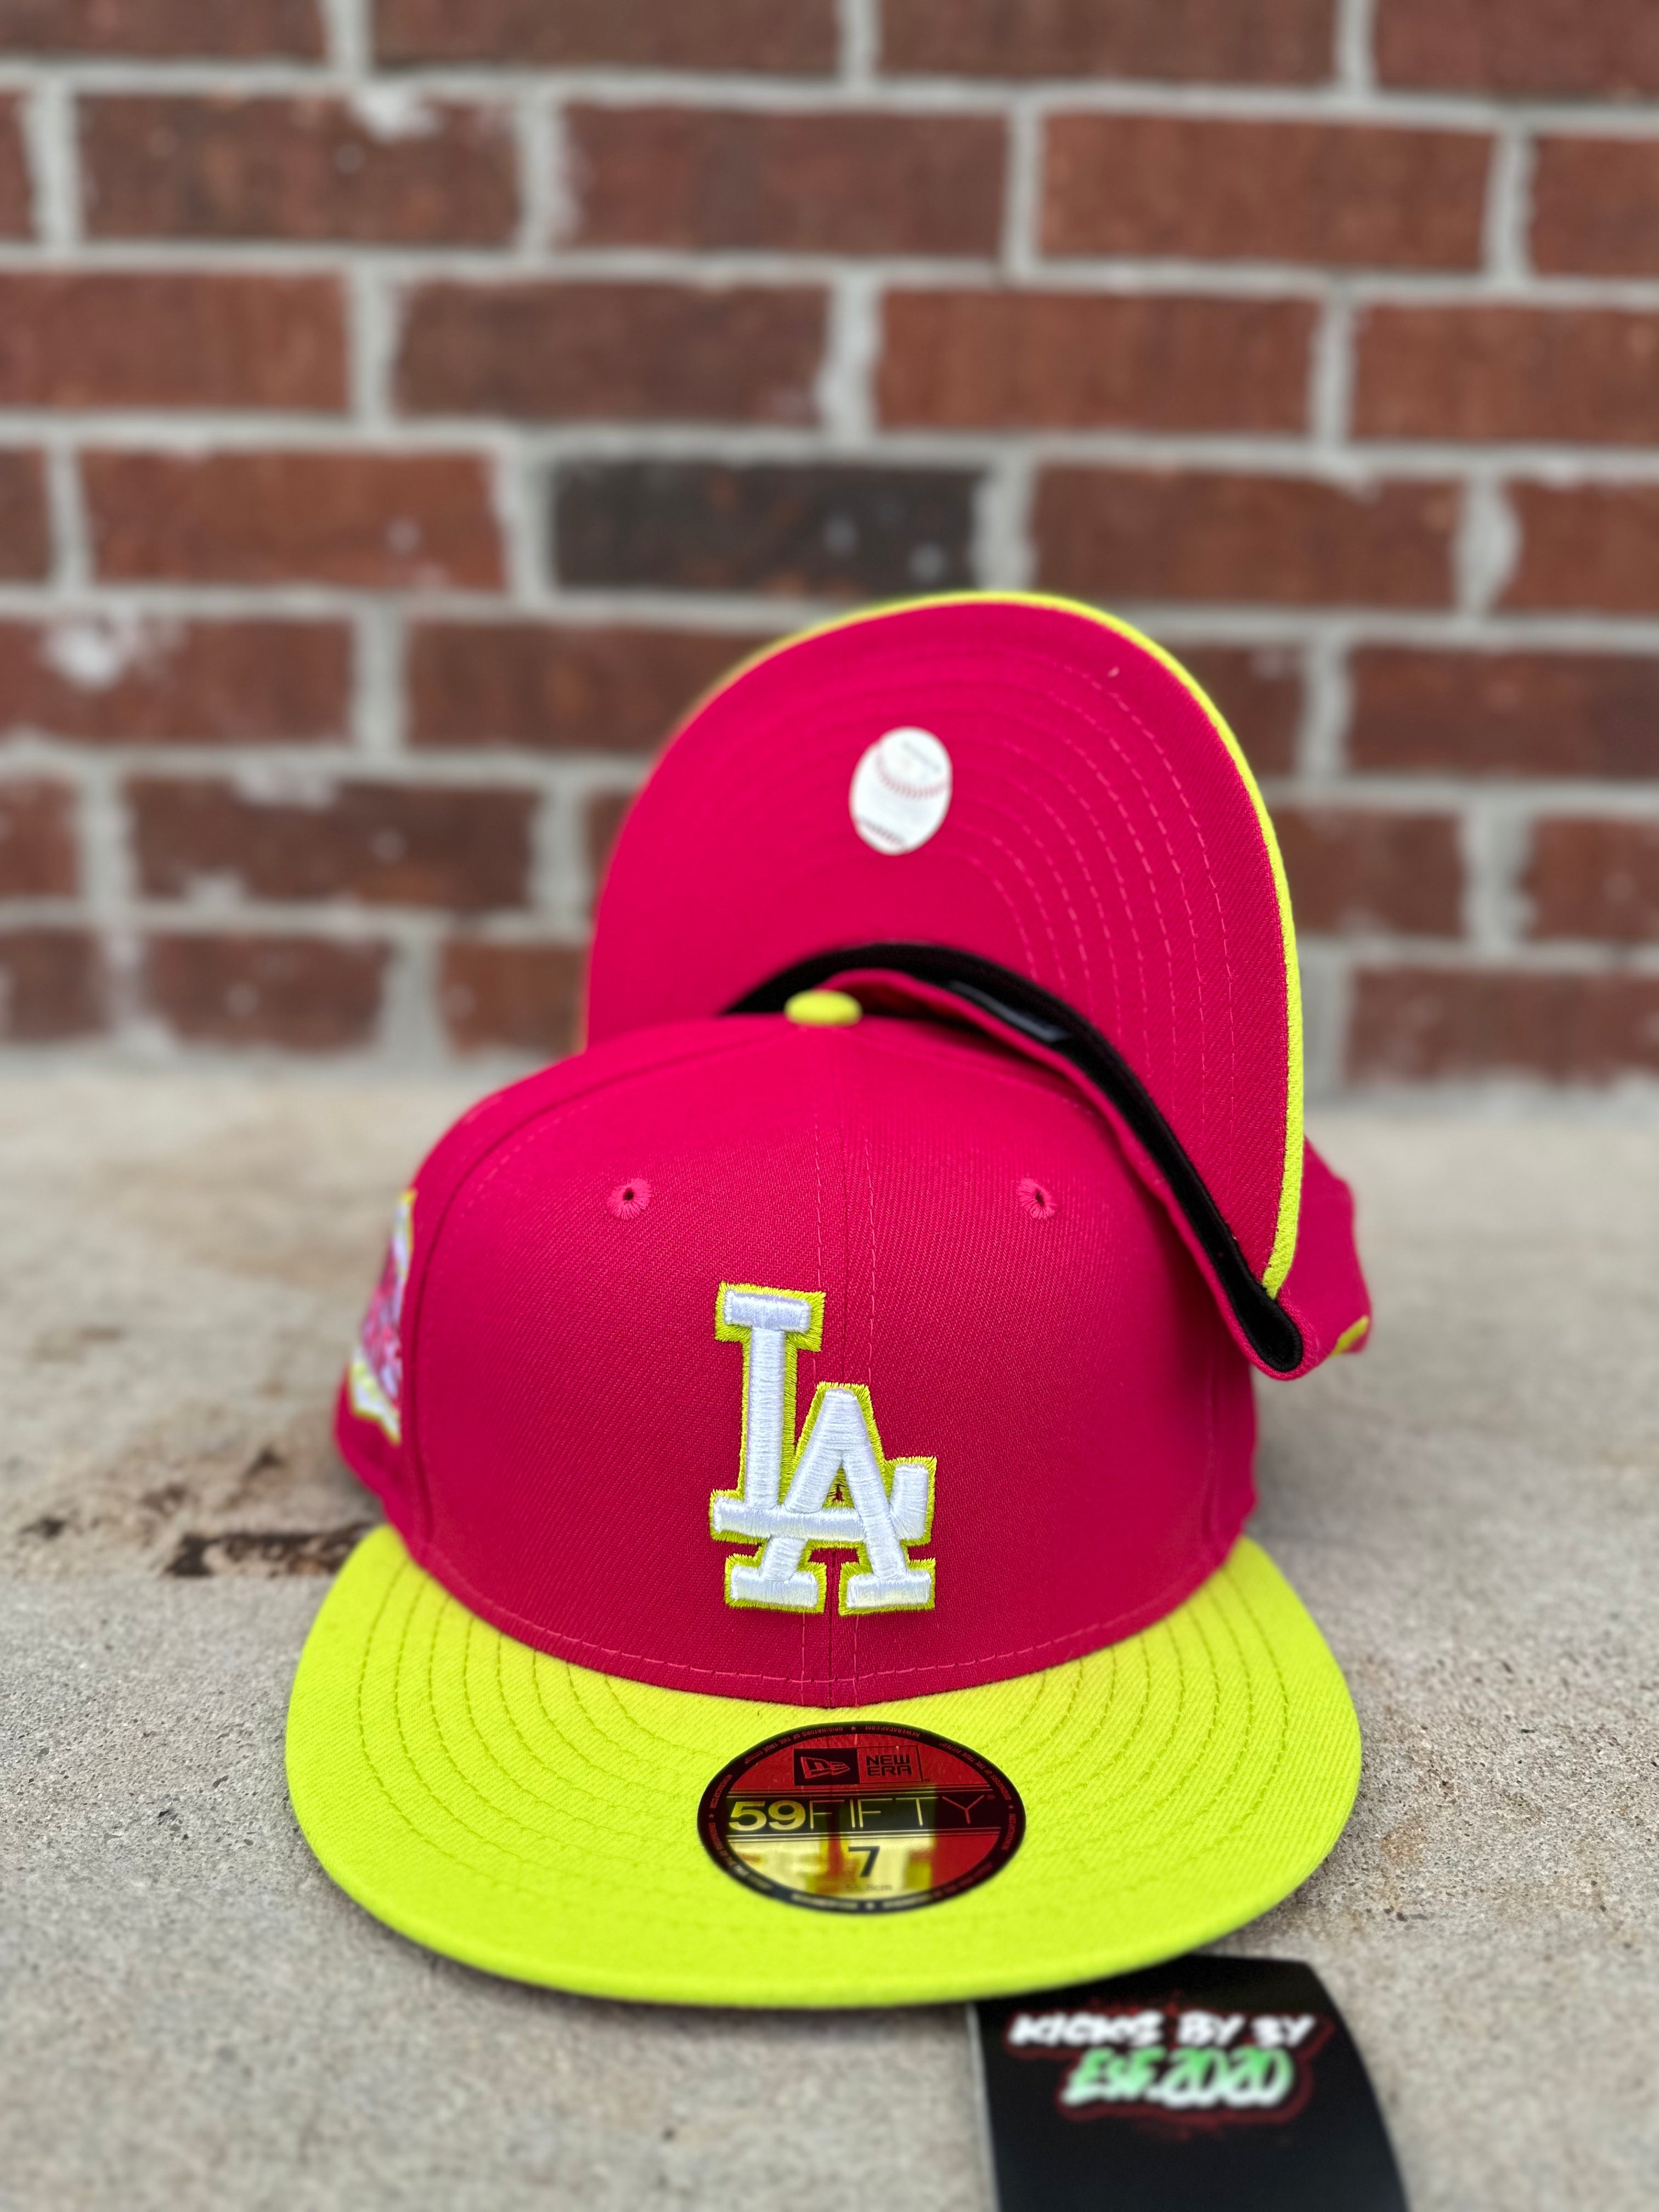 New Era 59 FIFTY Fitted "Los Angeles Dodgers" 2020 World Series Pink/Green